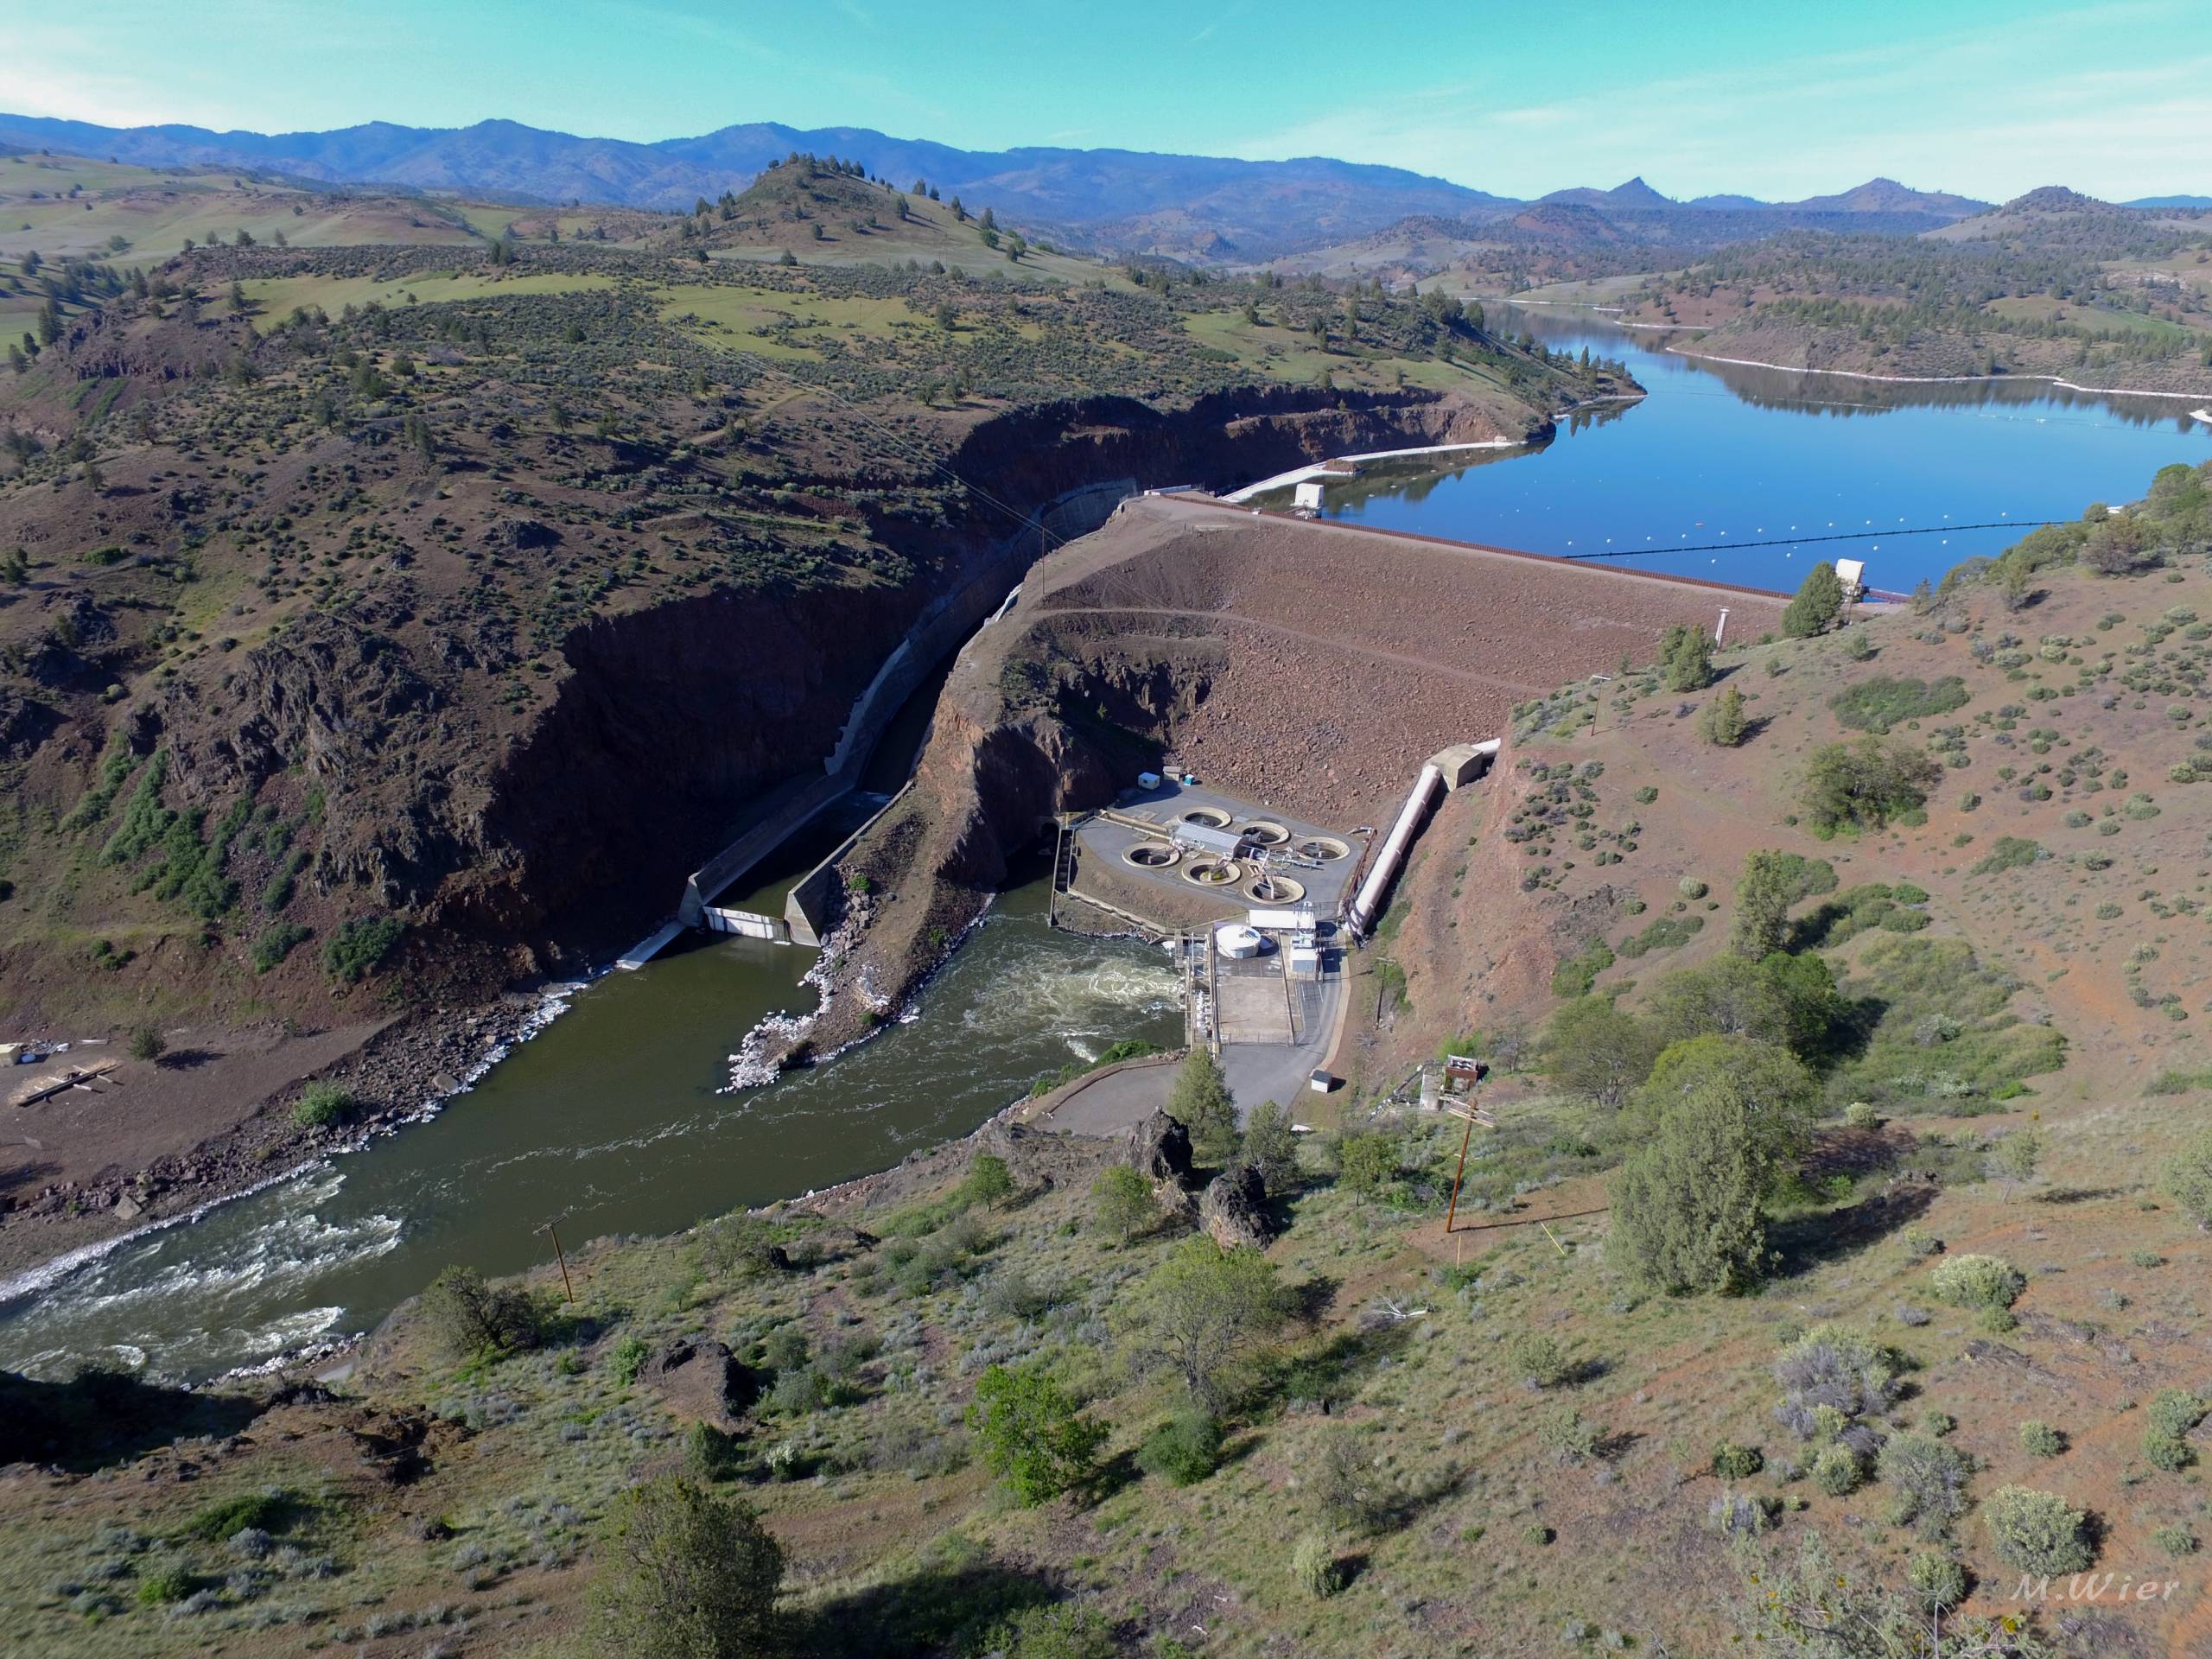 Southern Oregon dam operators now face water pollution fines on top of  millions for fish kills - OPB